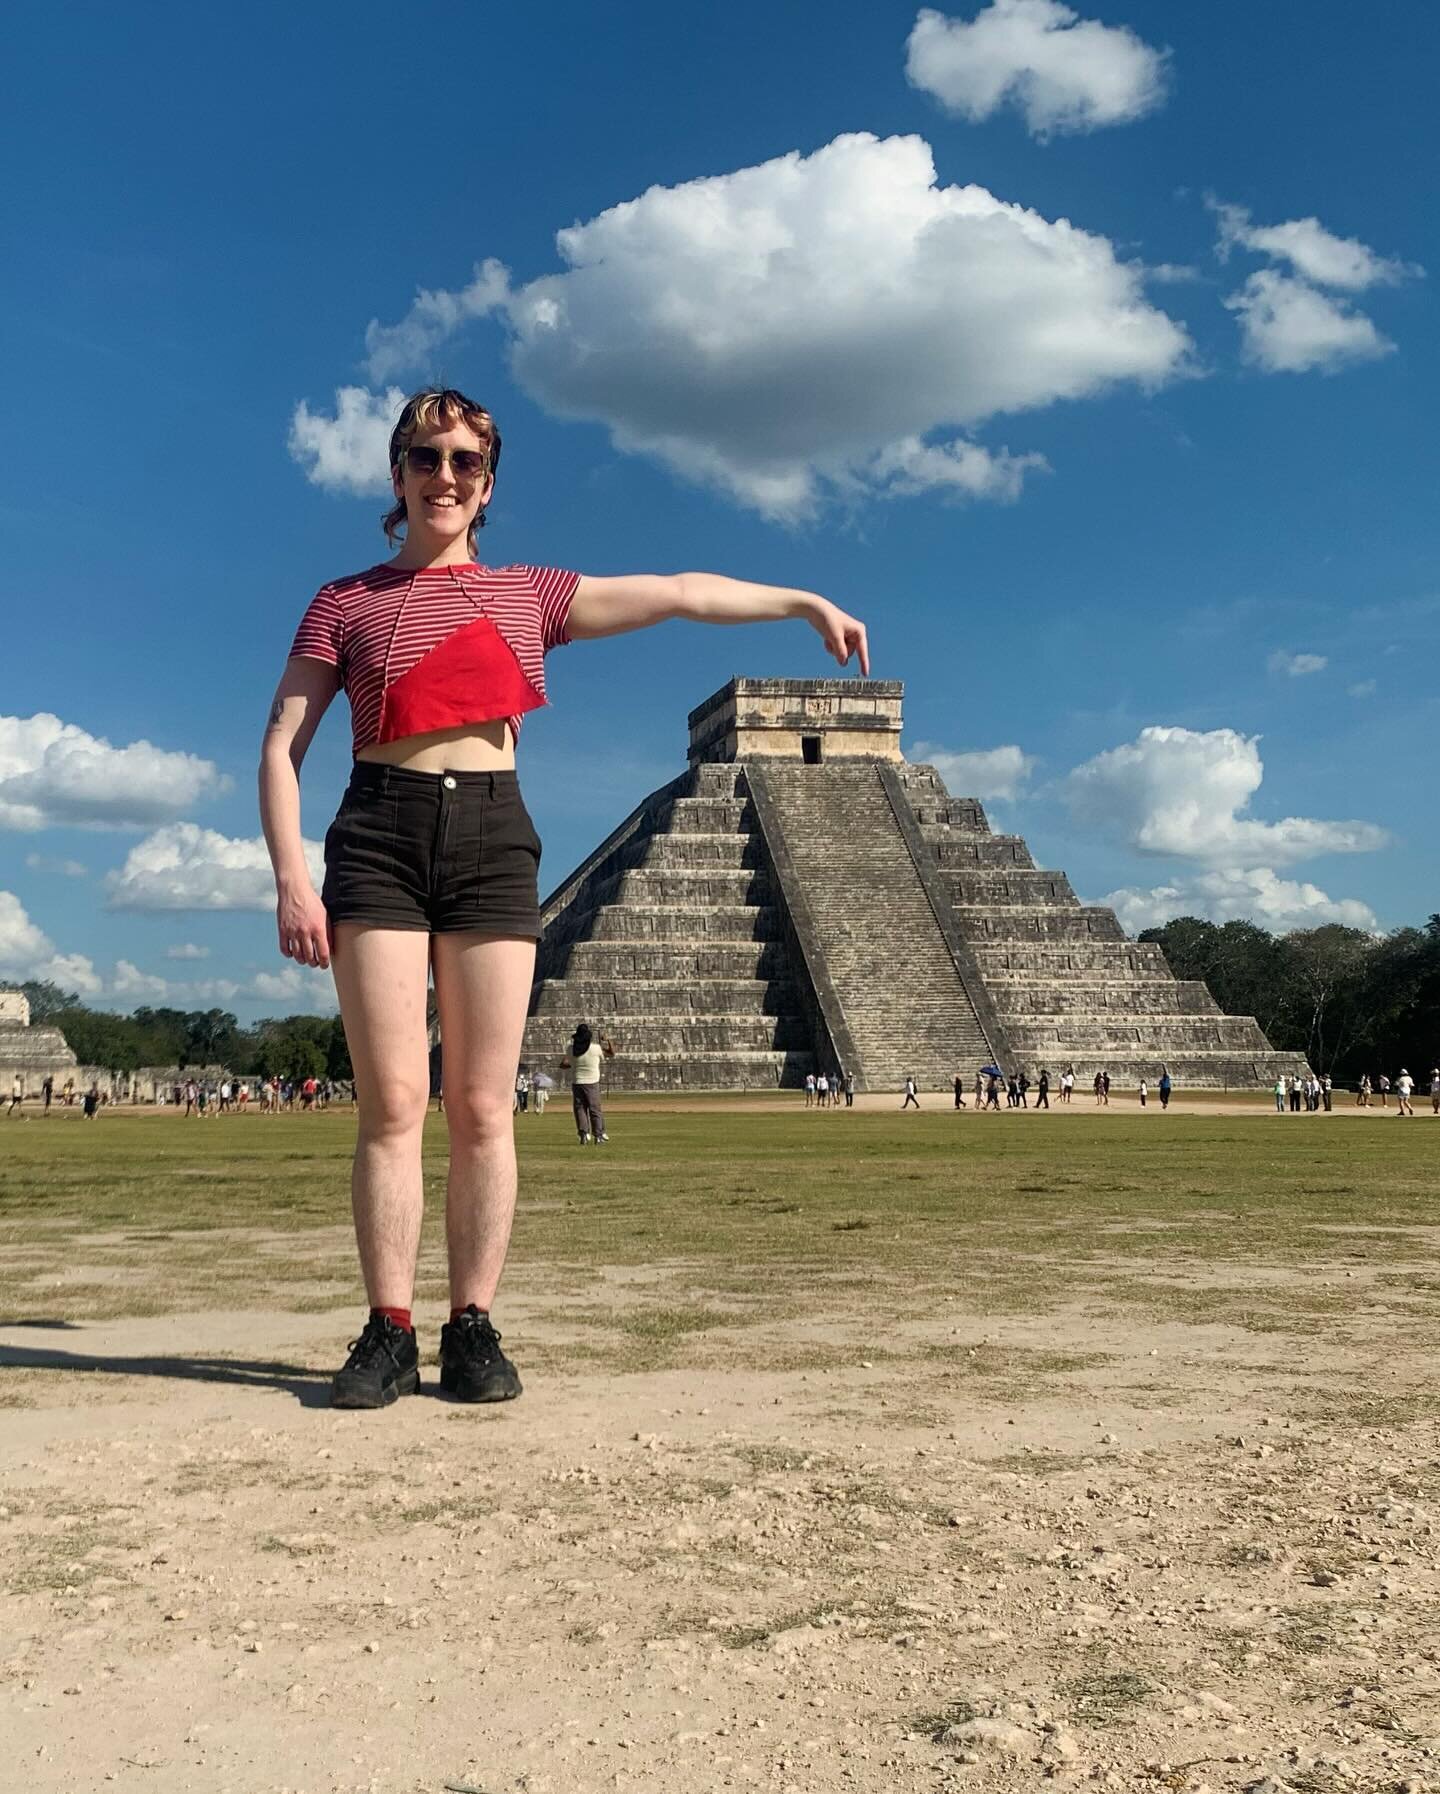 A magical first four days in Mexico starting in Playa del Carmen (and surrounding areas) 🇲🇽 

I saw Chich&eacute;n Itz&aacute; (one of the seven wonders of the world), made some wonderful friends, swam in the sea, ate chilaquiles, tried to protect 